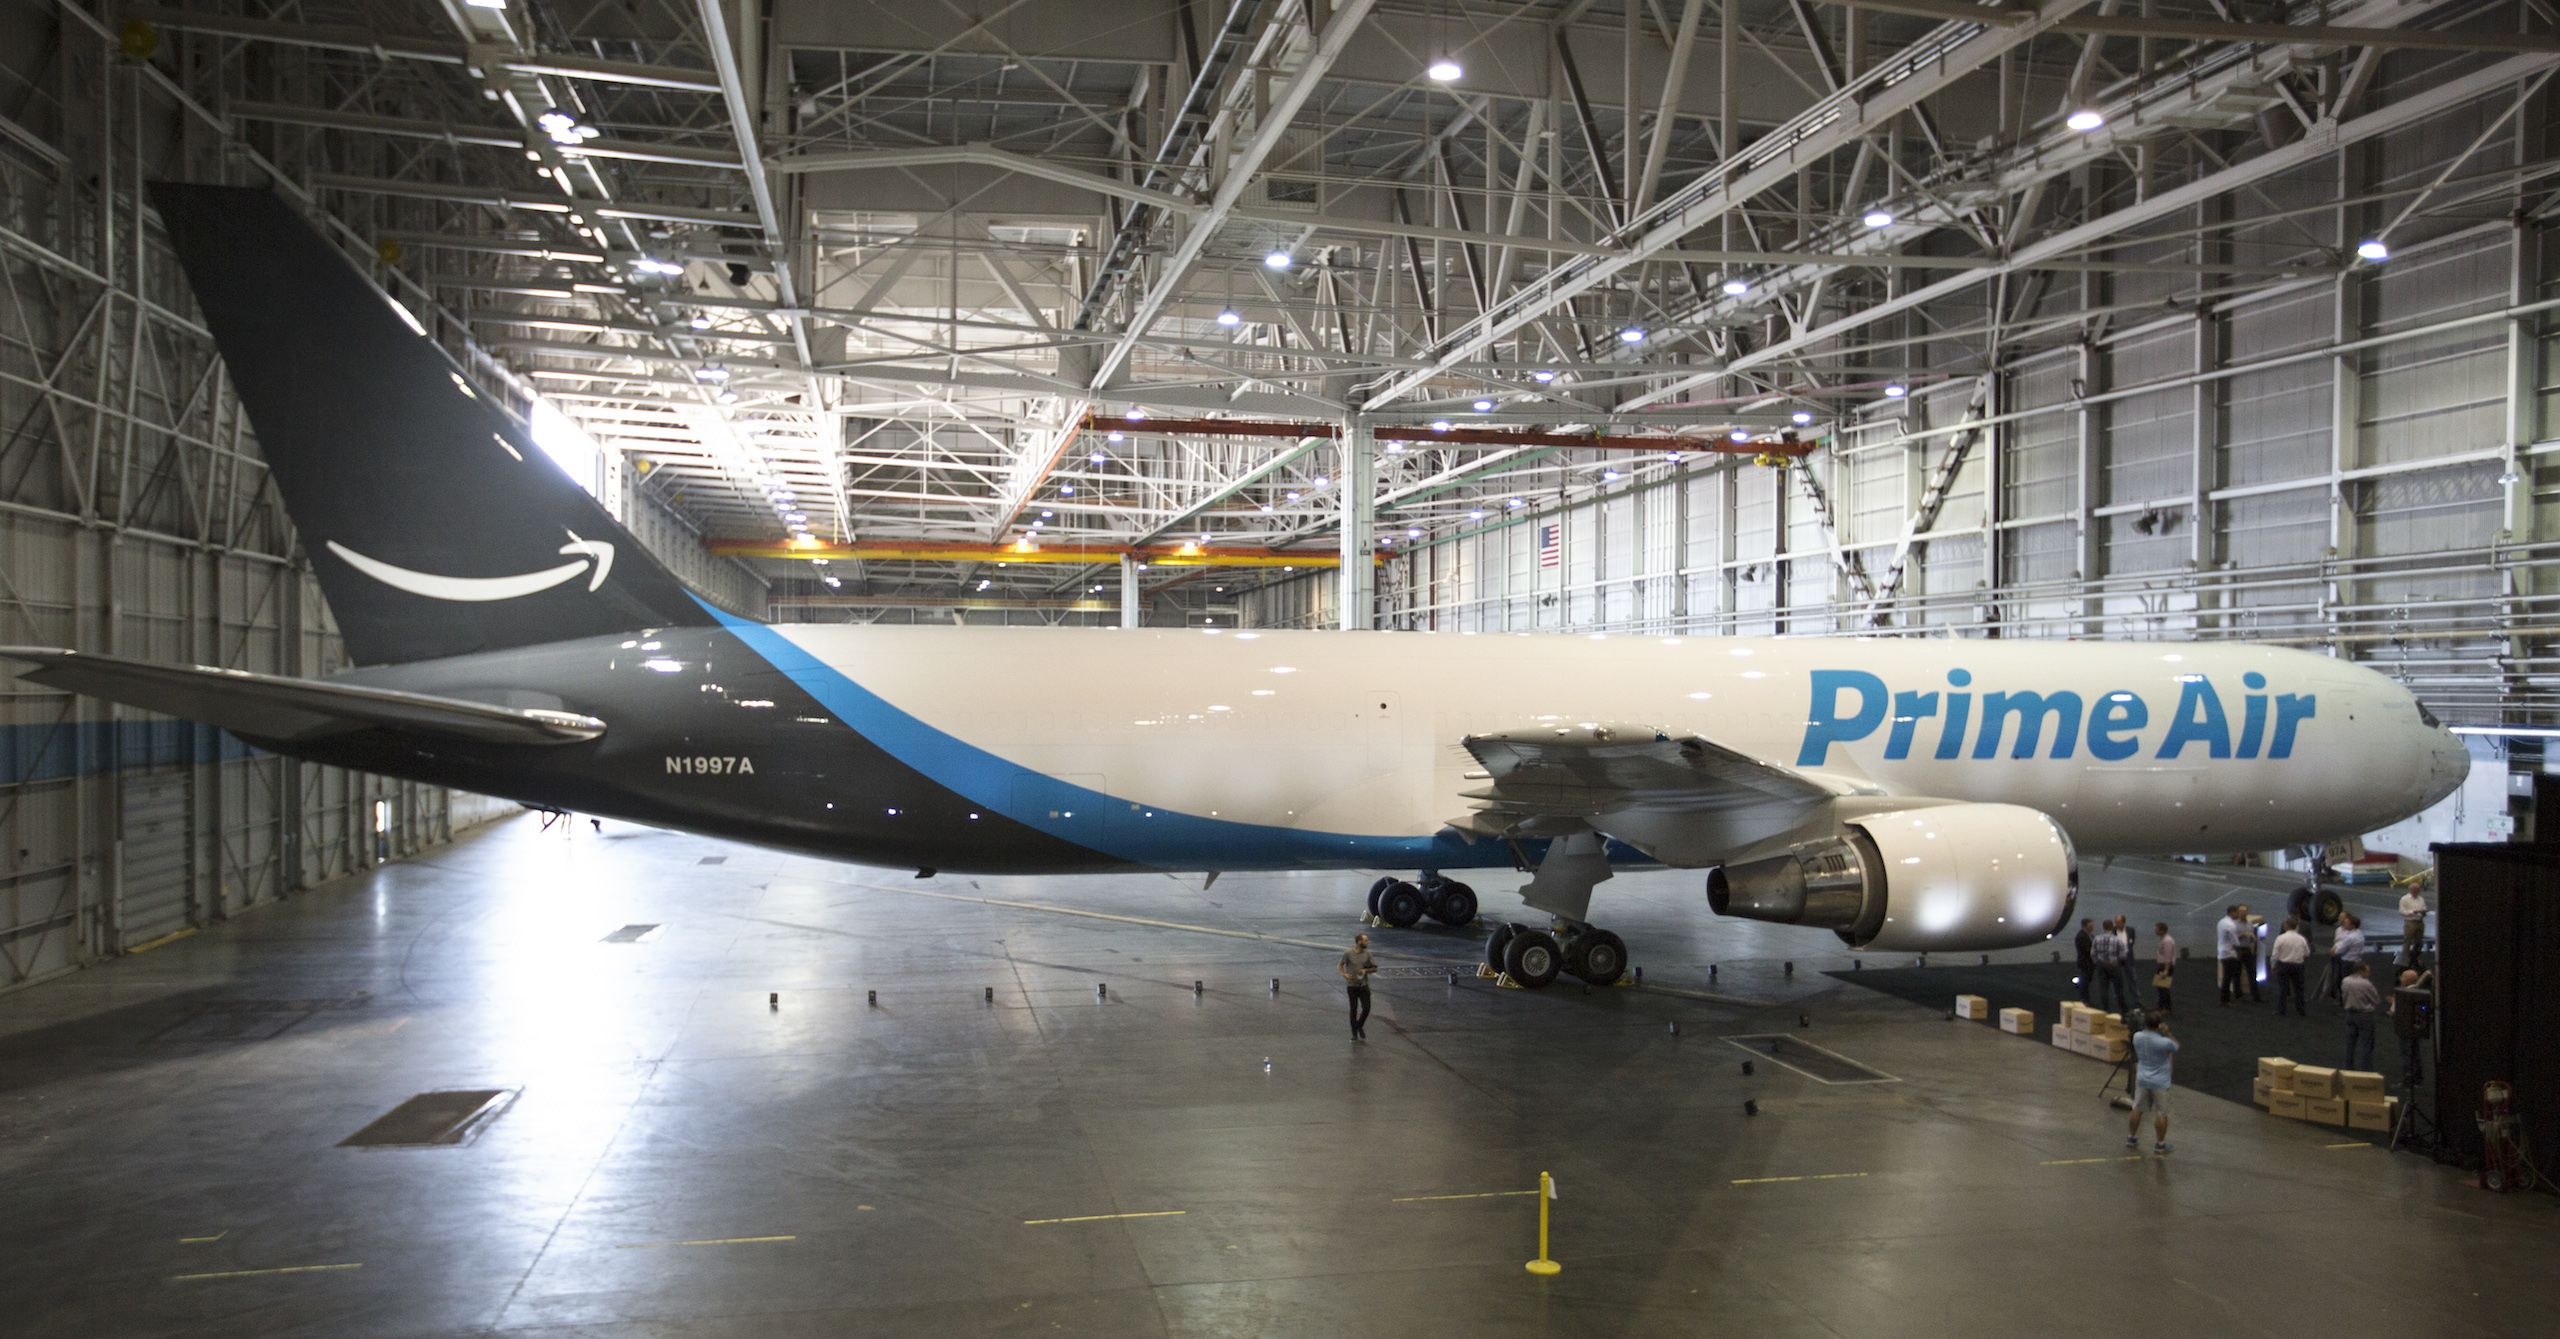 An Amazon 'Prime Air' plane. The company is investing in its own planes to deliver packages faster and more efficiently. Image: Amazon